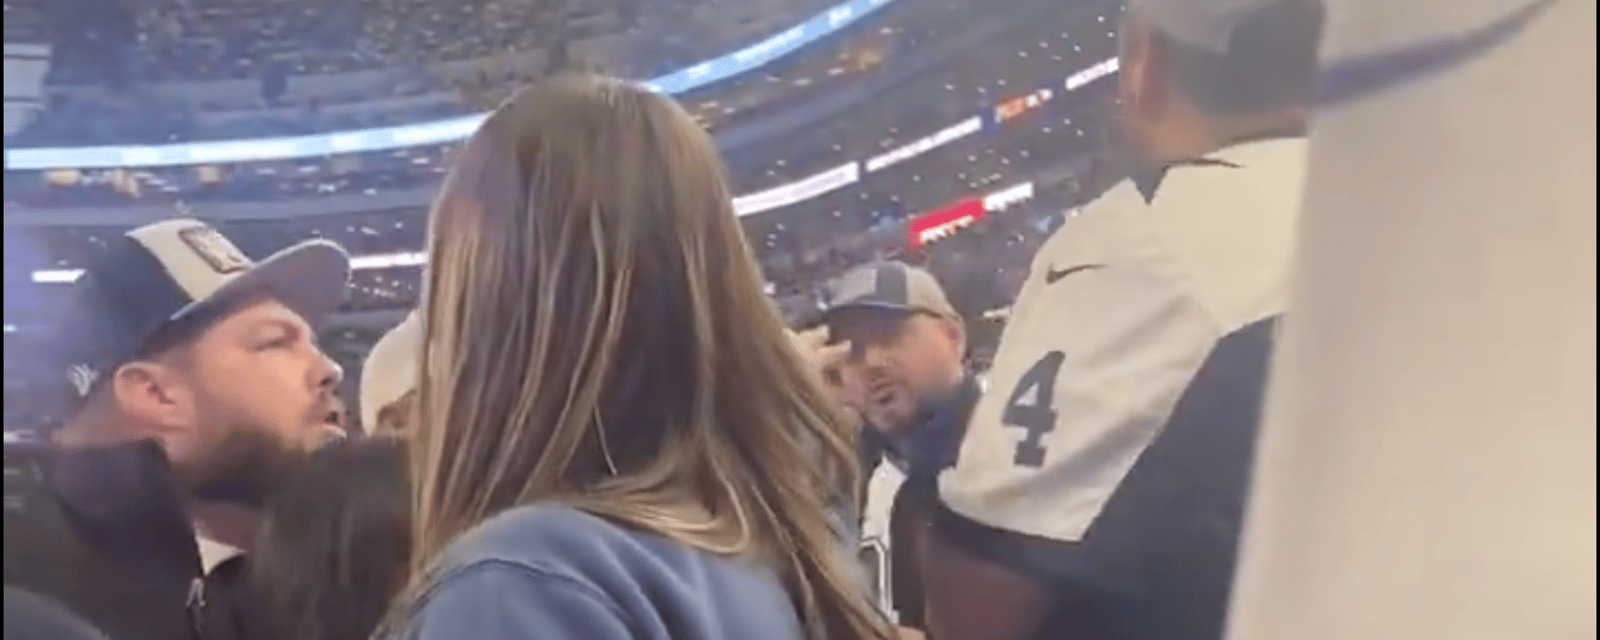 VIDEO: Cowboys fans fight during playoff loss! 